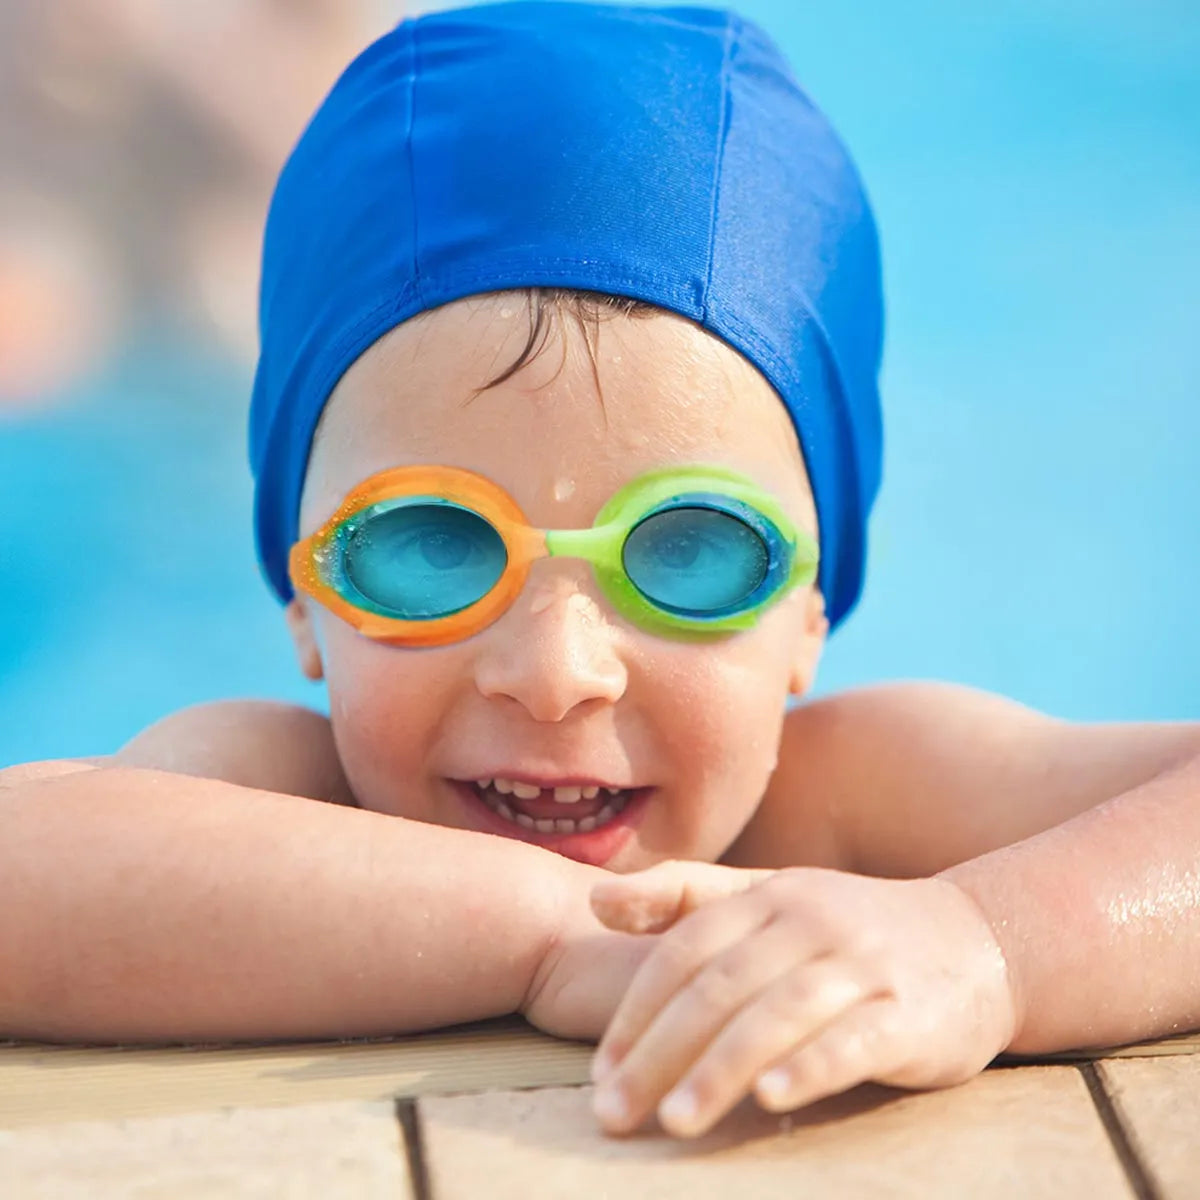 Swim Goggles for Kids 2 pack